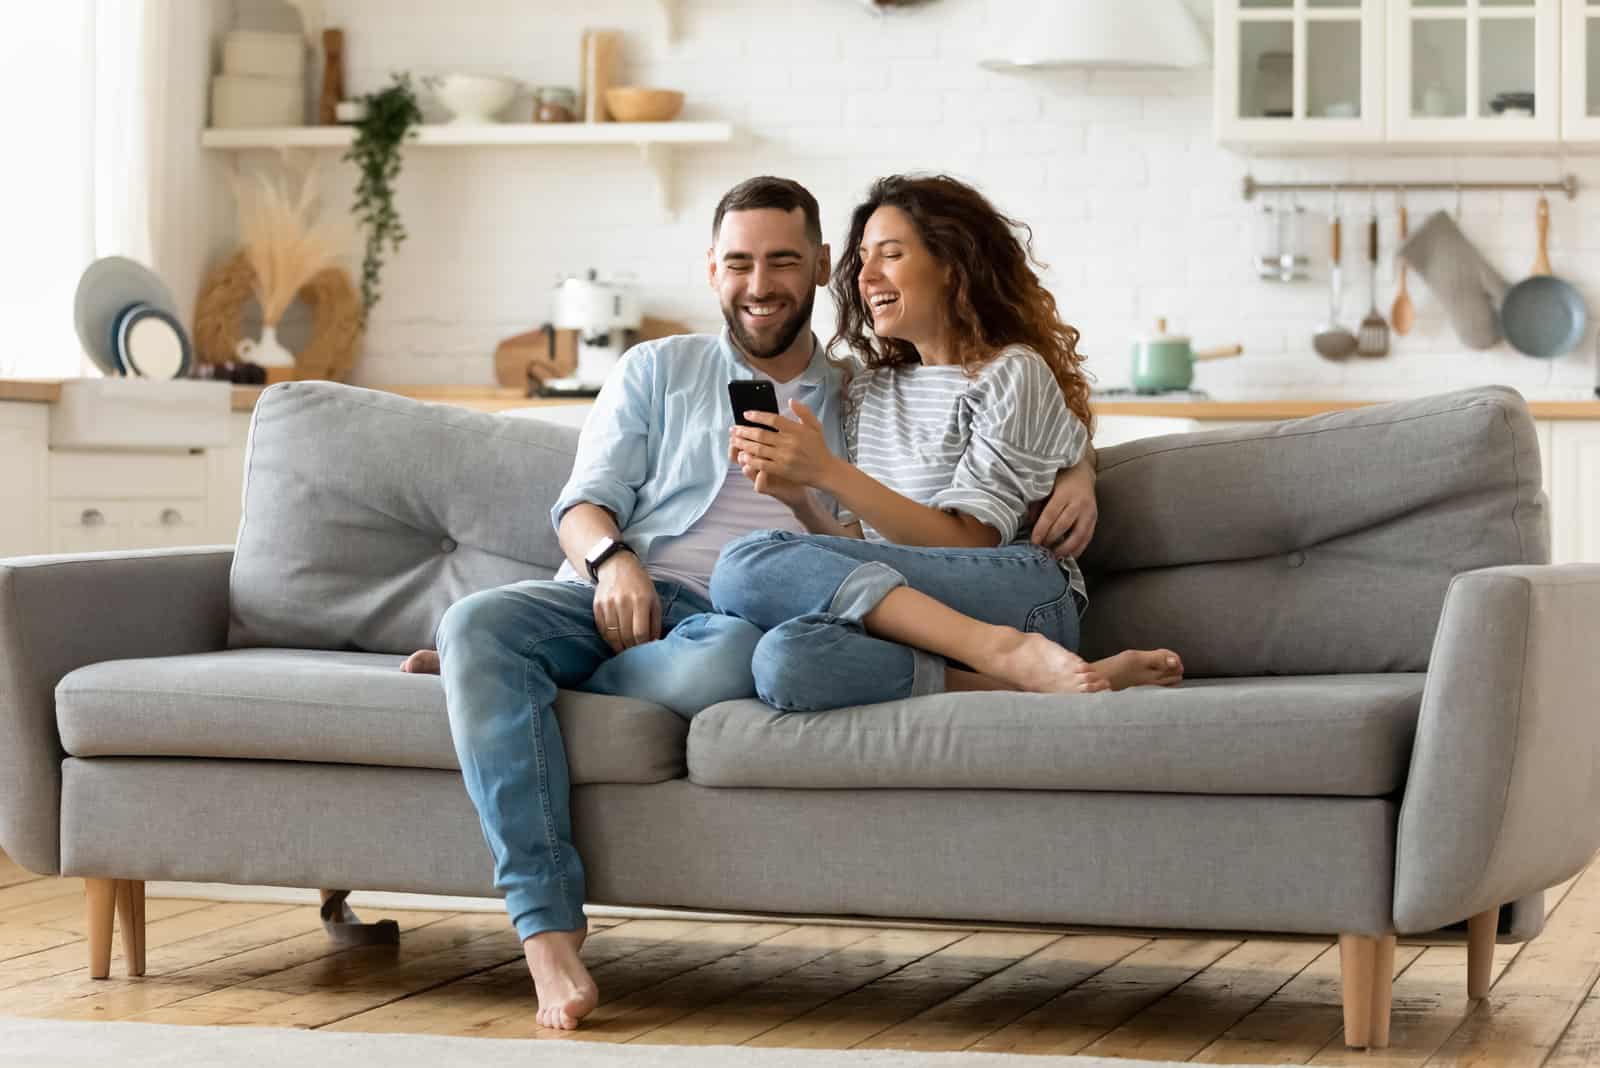 a smiling man and woman sit on the couch and look at the phone